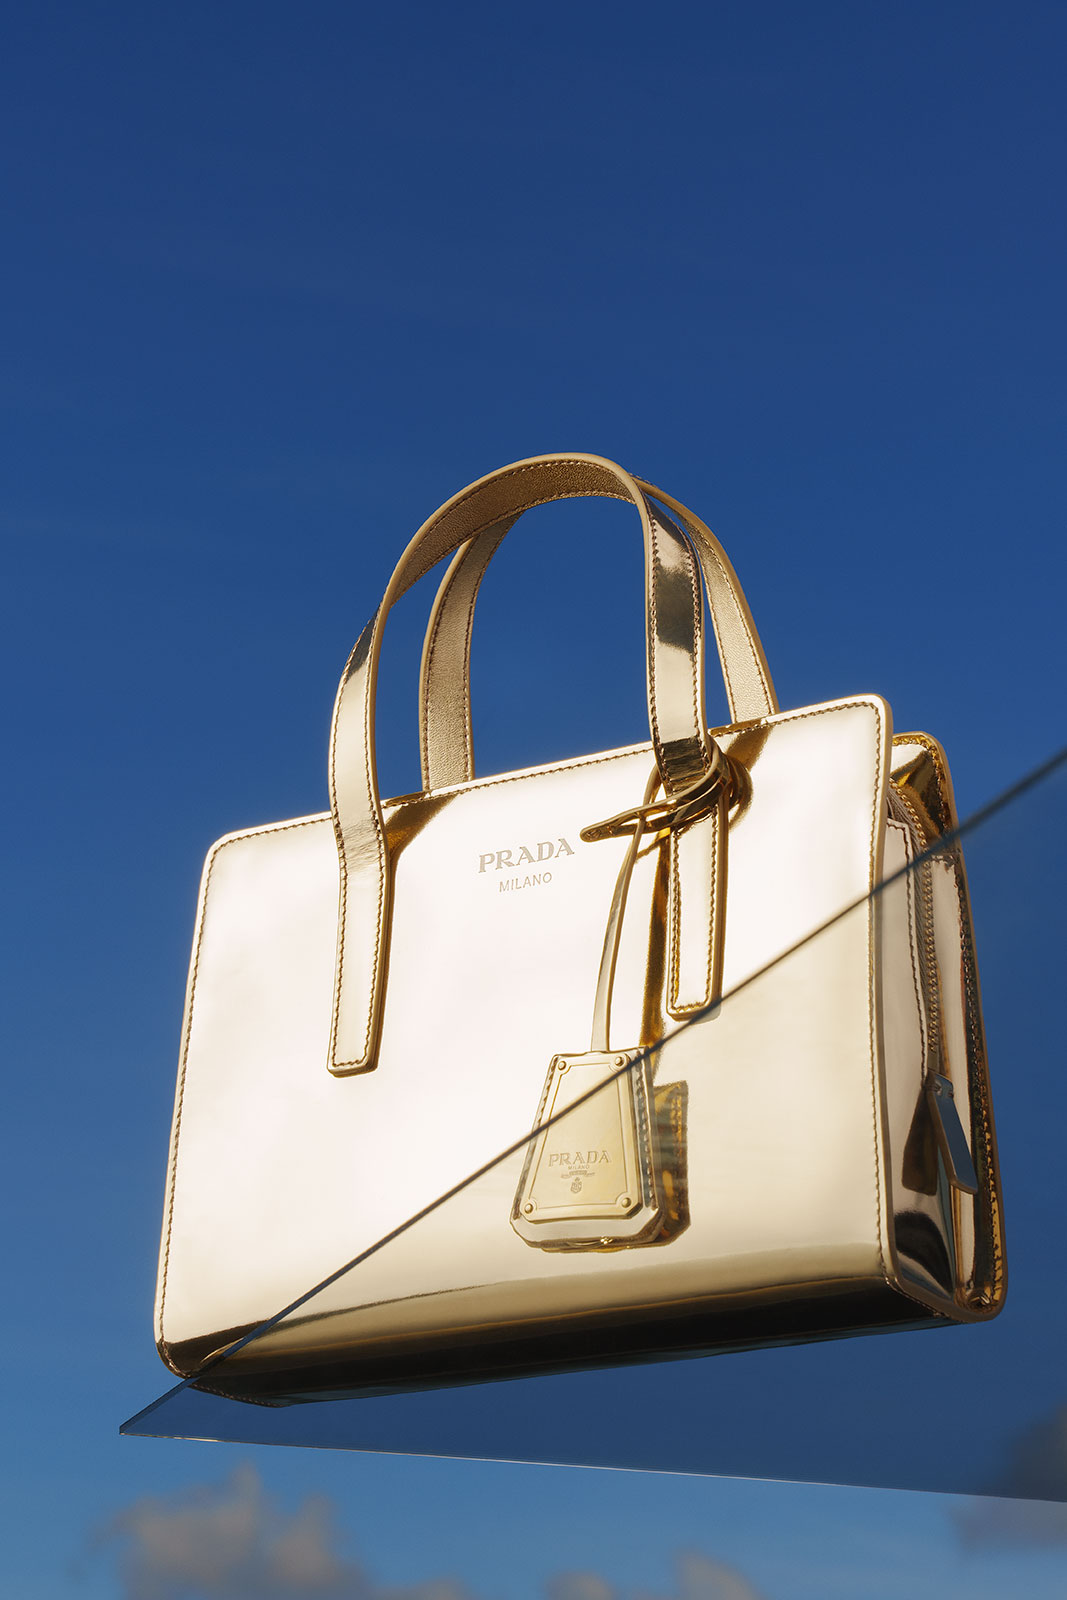 The Prada Cahier is the Effortlessly Cool Bag You Need This Fall, PurseBlog.com